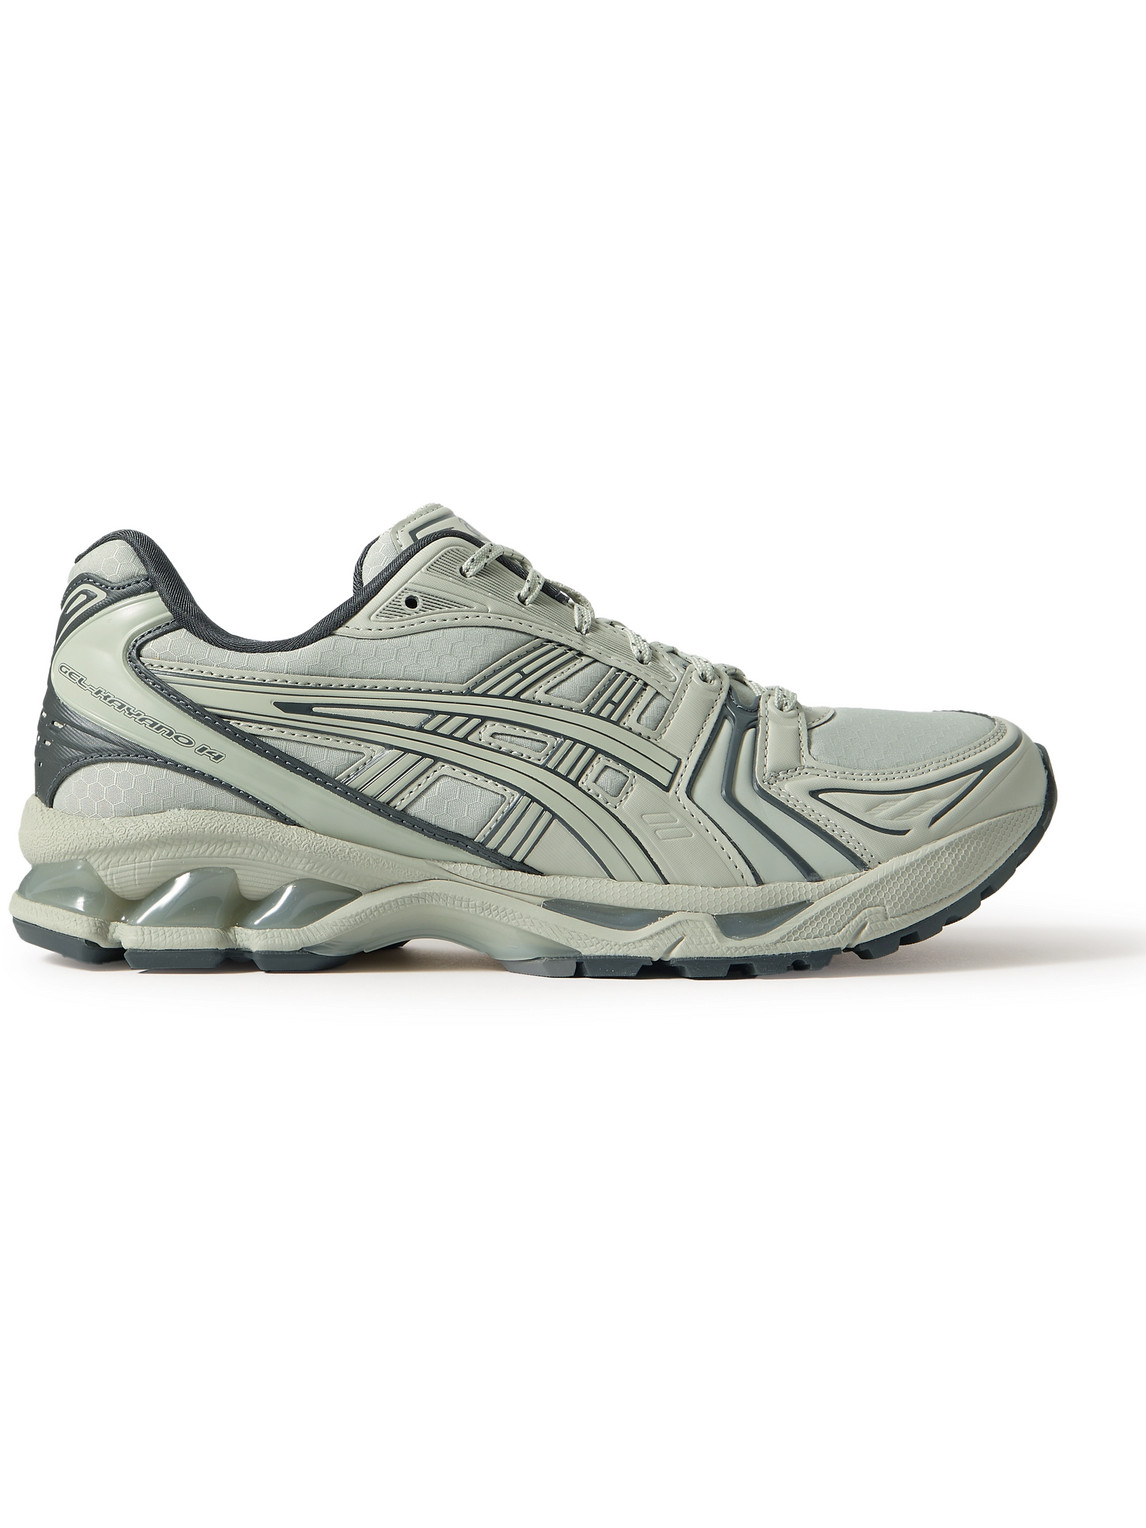 ASICS GEL-KAYANO® 14 RUBBER-TRIMMED MESH trainers